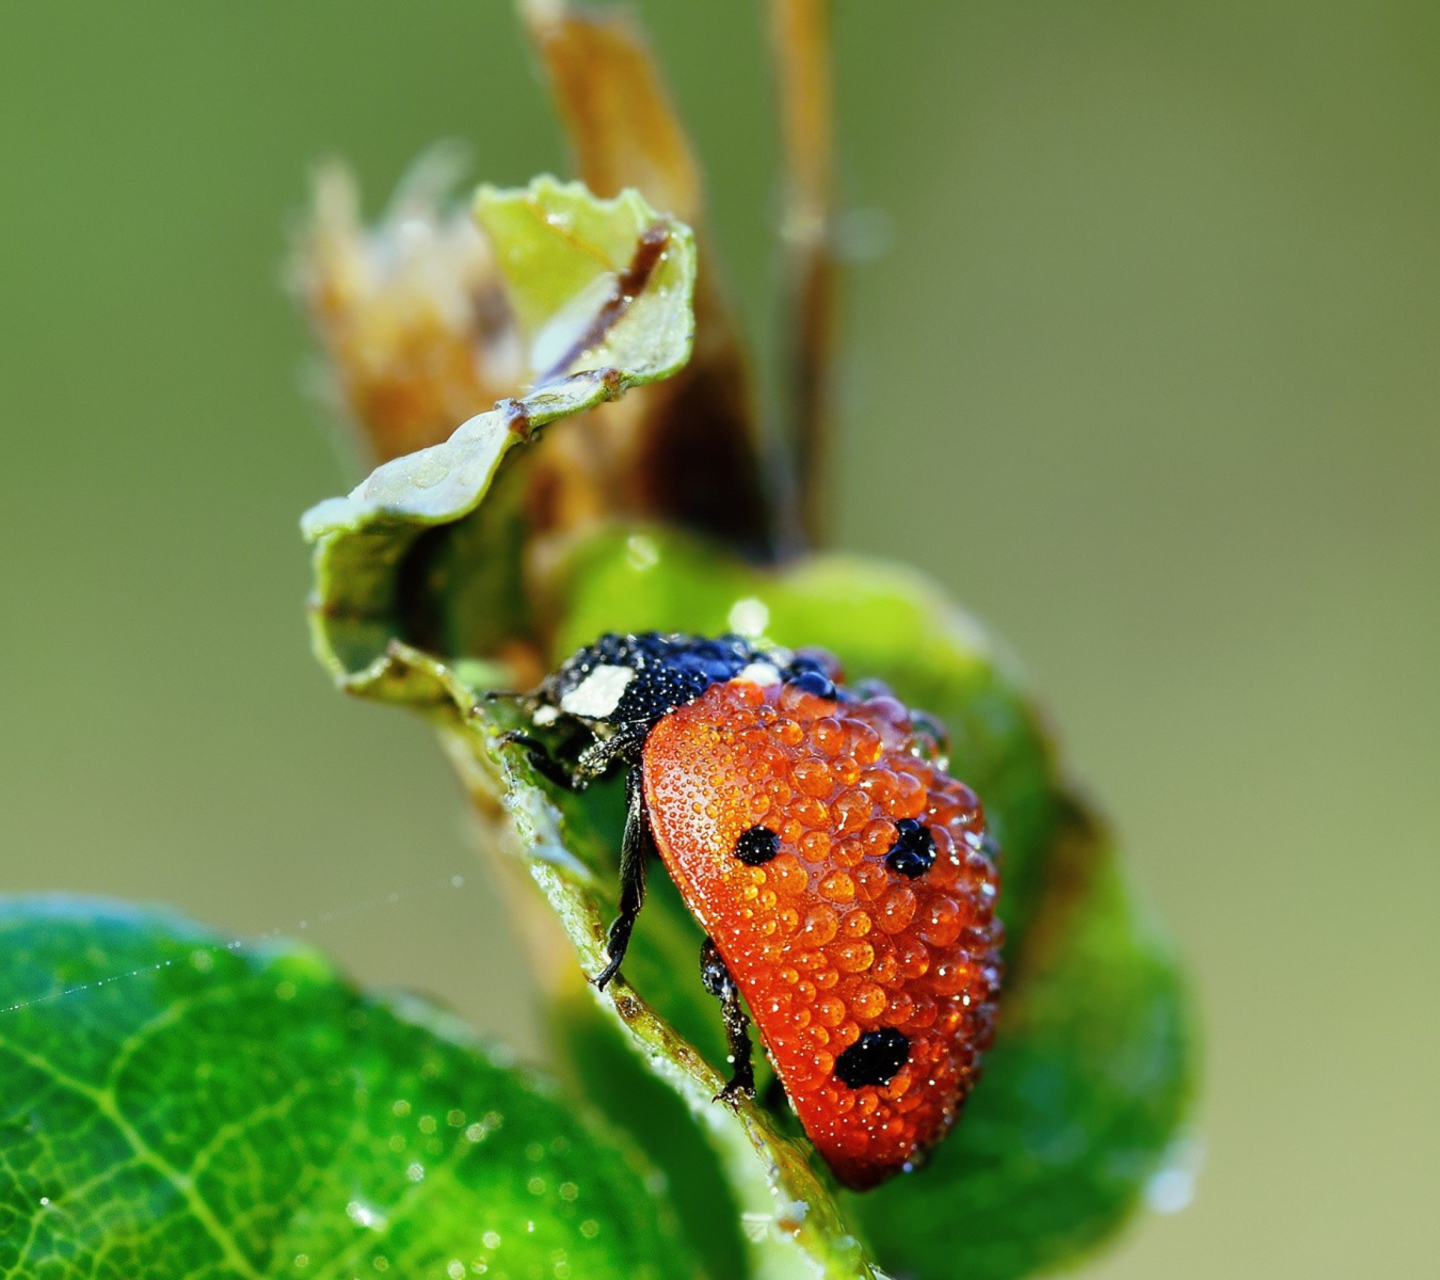 Ladybug Covered With Dew Drops screenshot #1 1440x1280